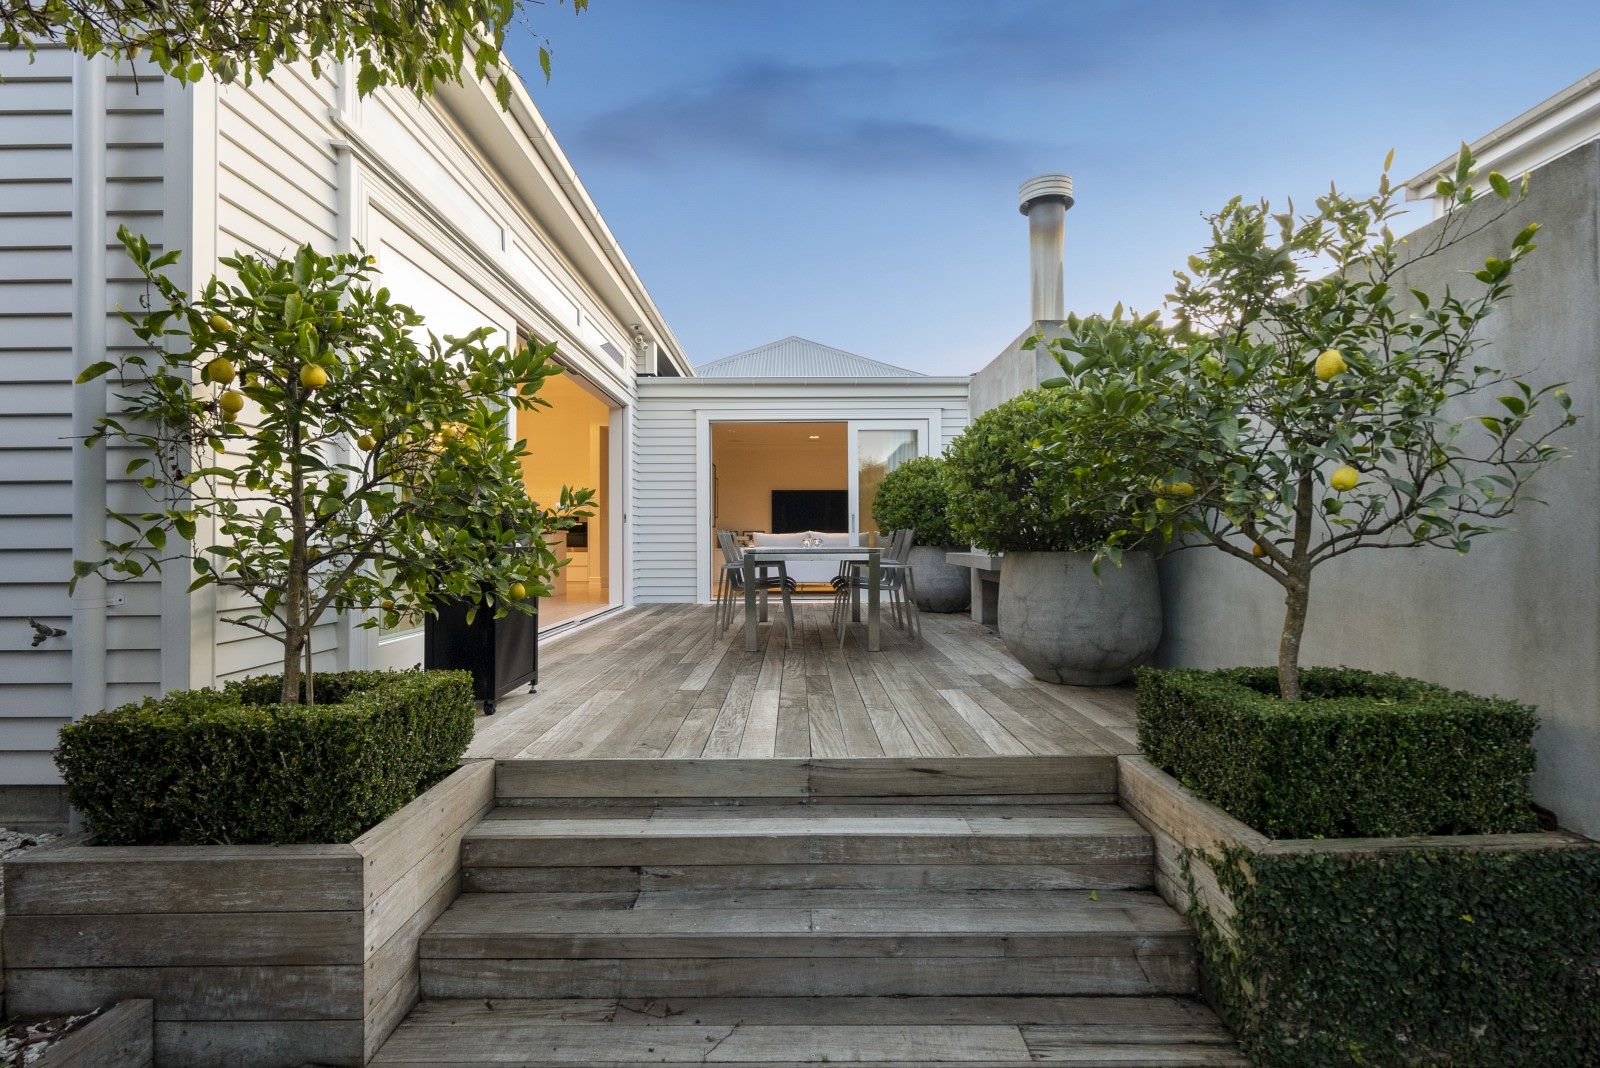 Don't neglect your exterior spaces when it comes to an open home.